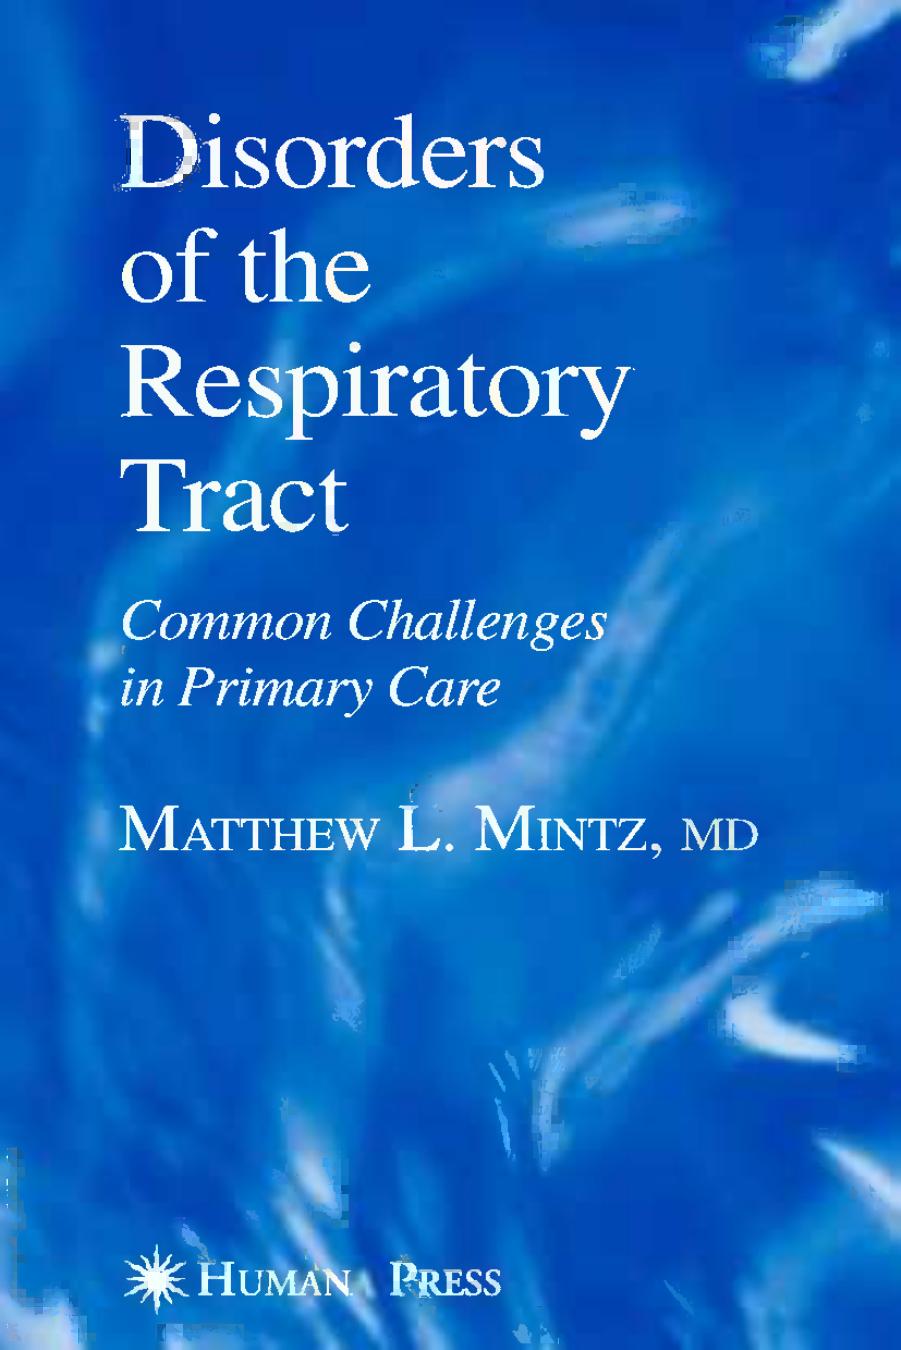 Disorders of the Respiratory Tract  Common Challenges in Primary Care 2006